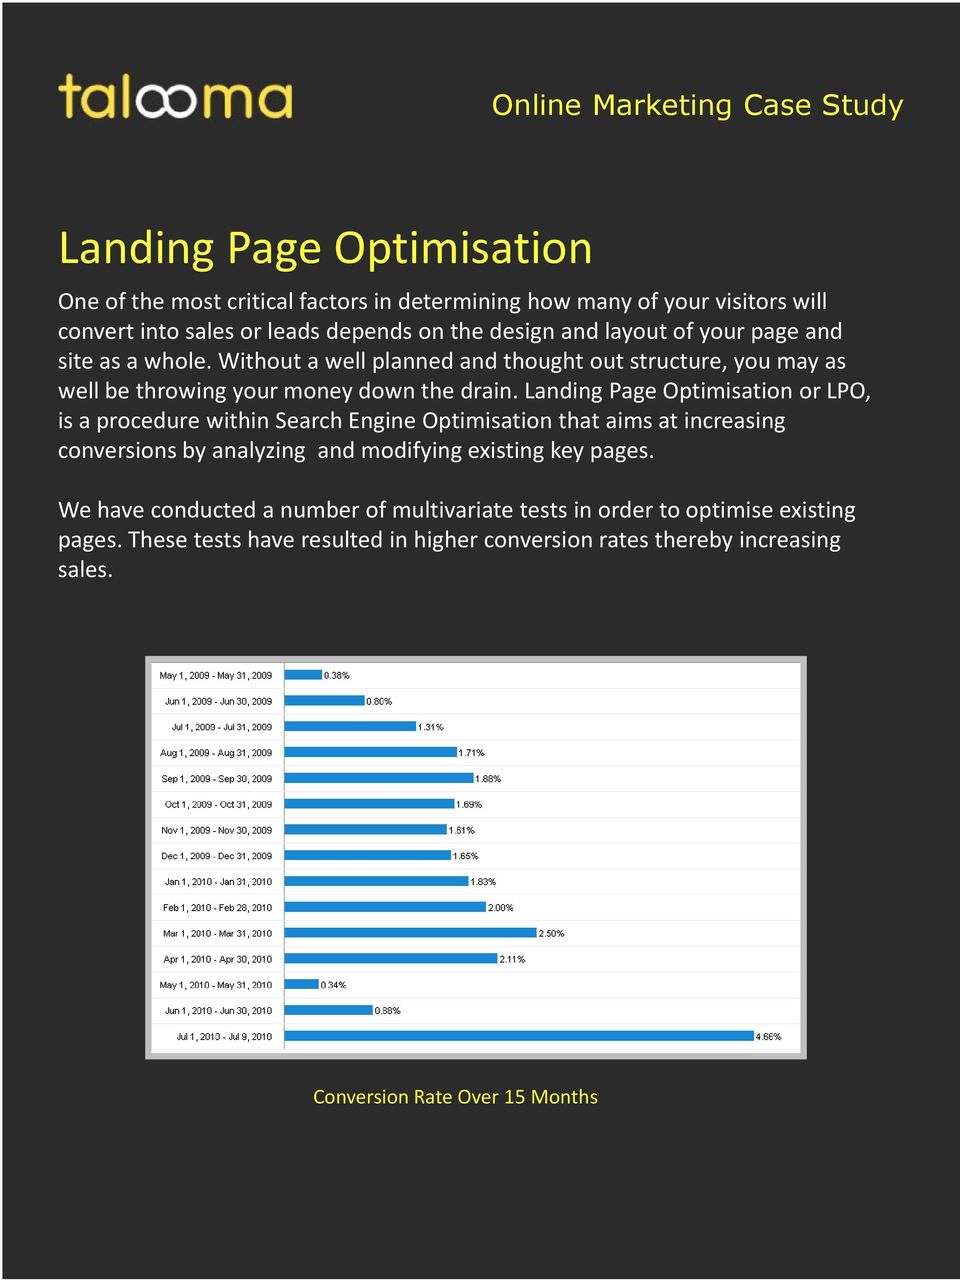 Landing Page Optimisation or LPO, is a procedure within Search Engine Optimisation that aims at increasing conversions by analyzing and modifying existing key pages.